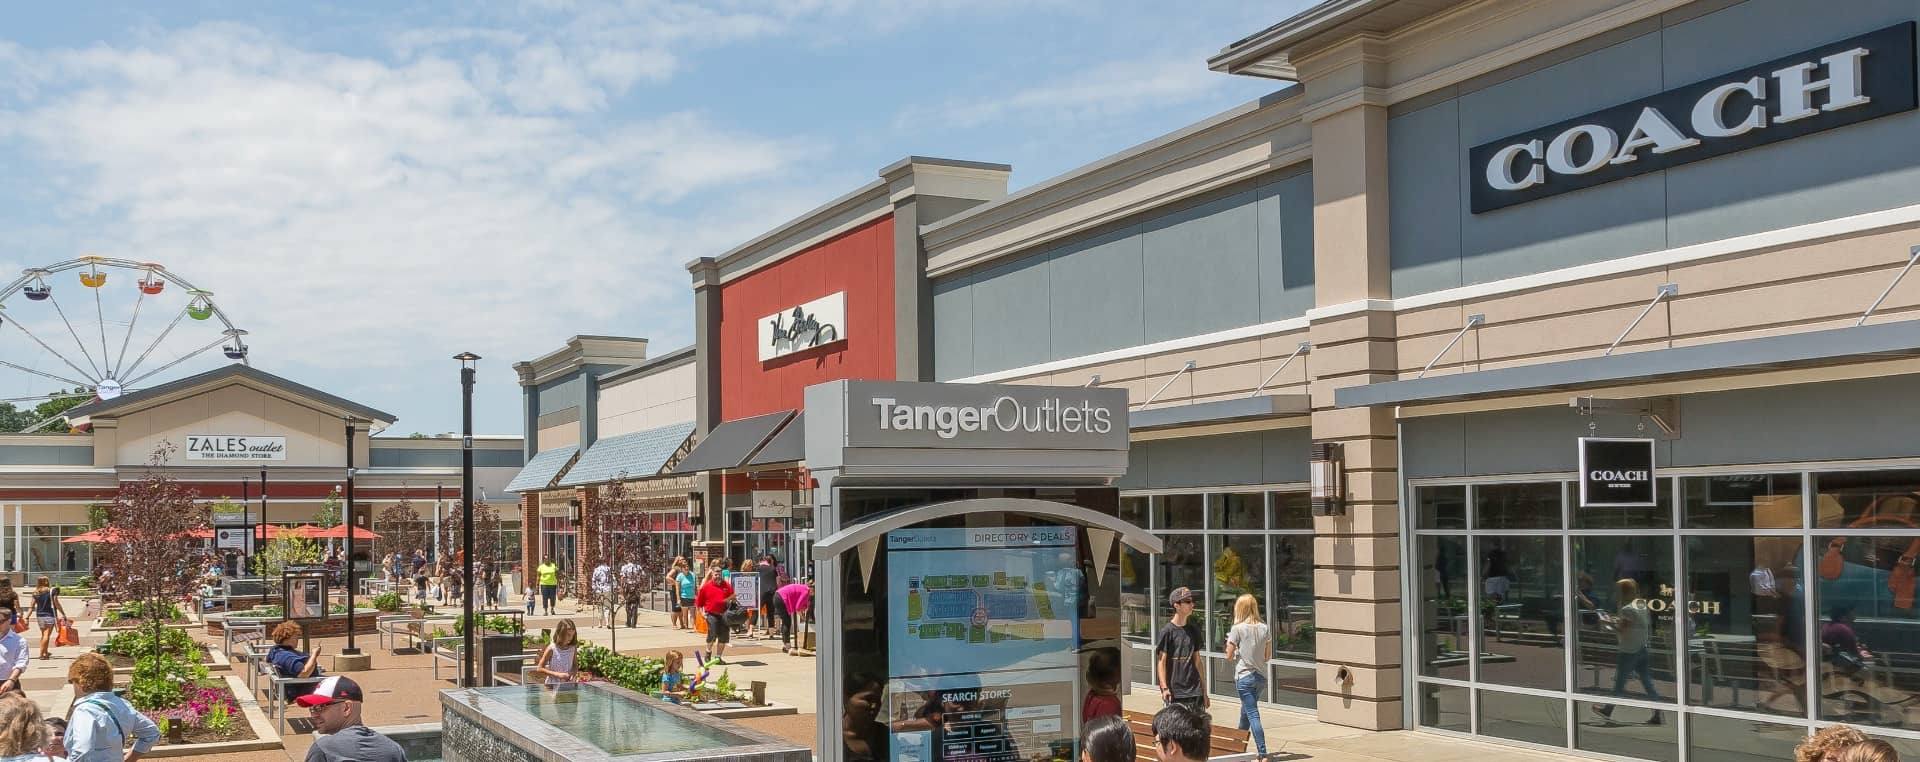 Tanger Outlets Columbus Center Images